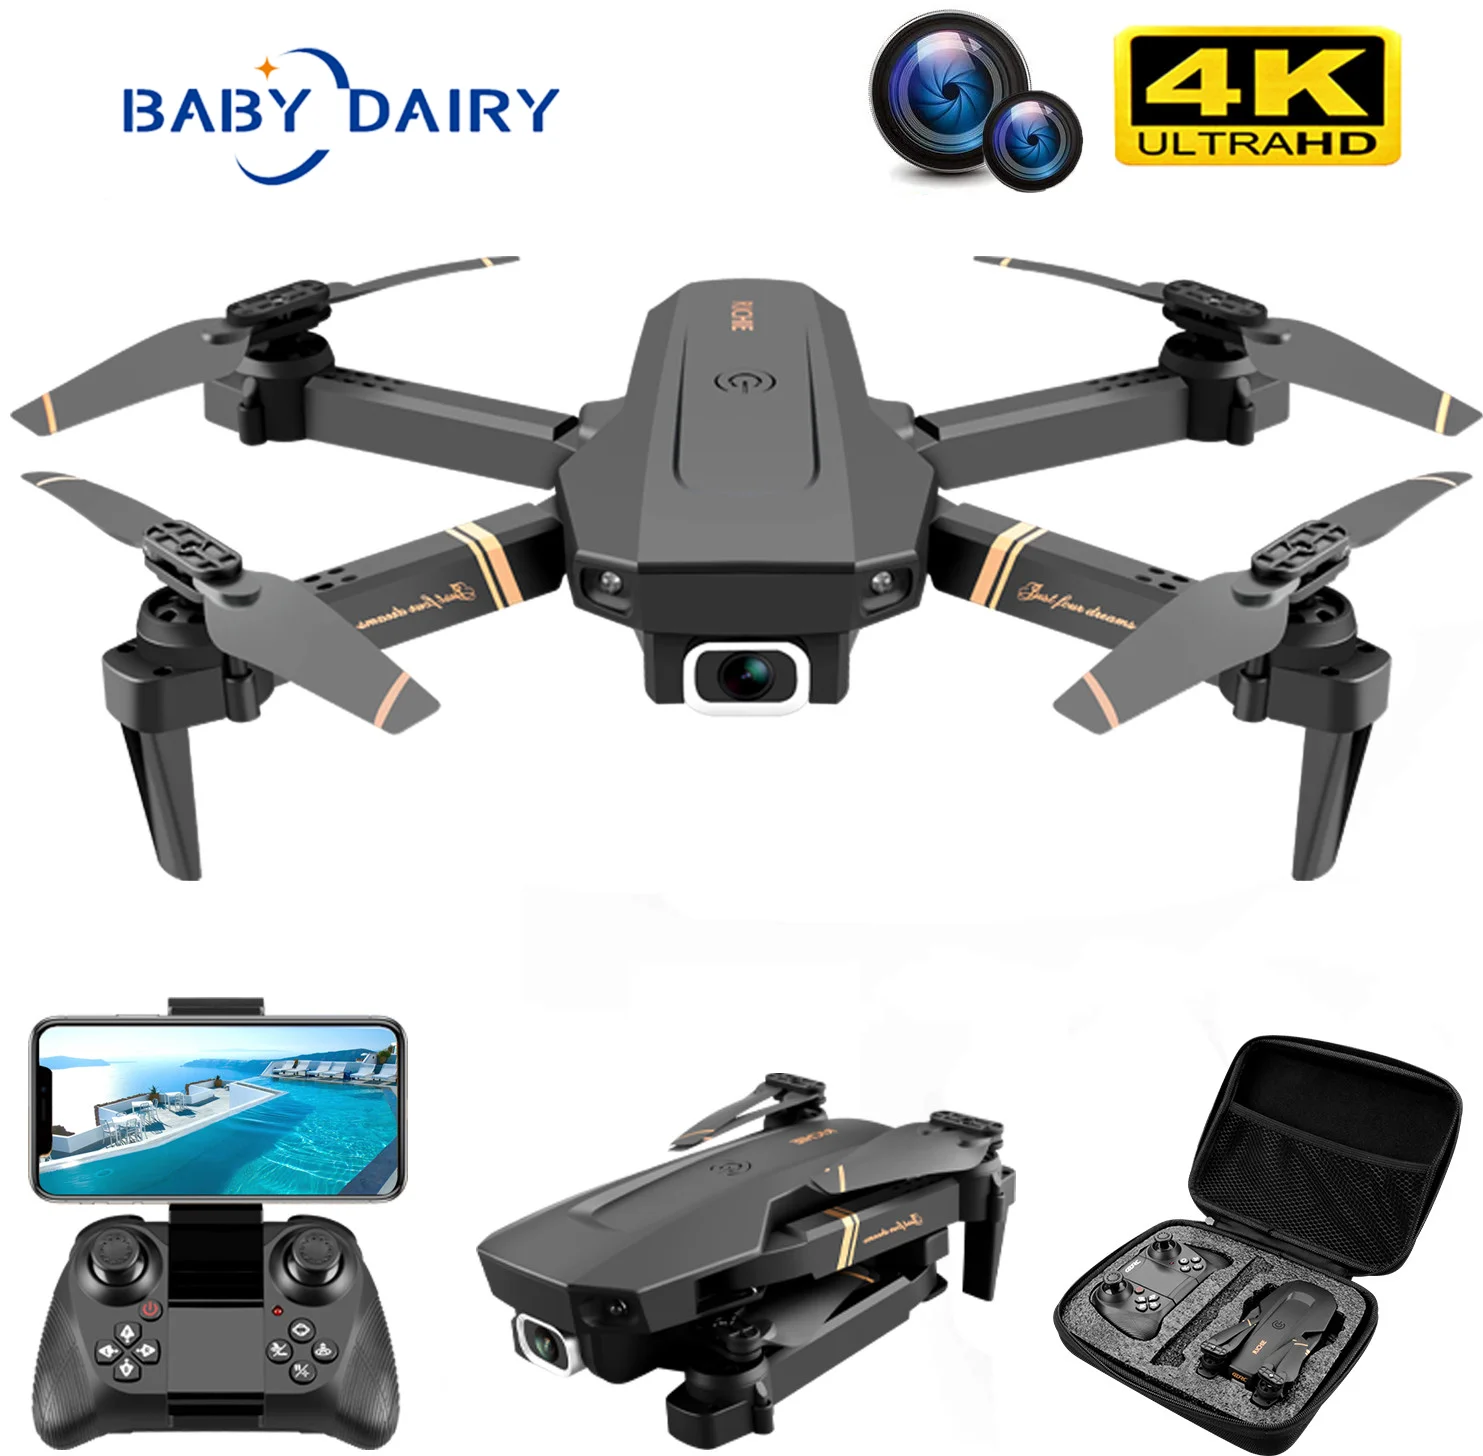 

BABY DAIRY V4 Rc Drone 4k HD Wide Angle Camera 1080P WiFi Fpv Drone Dual Camera Quadcopter Realtime transmission Helicopter Toys